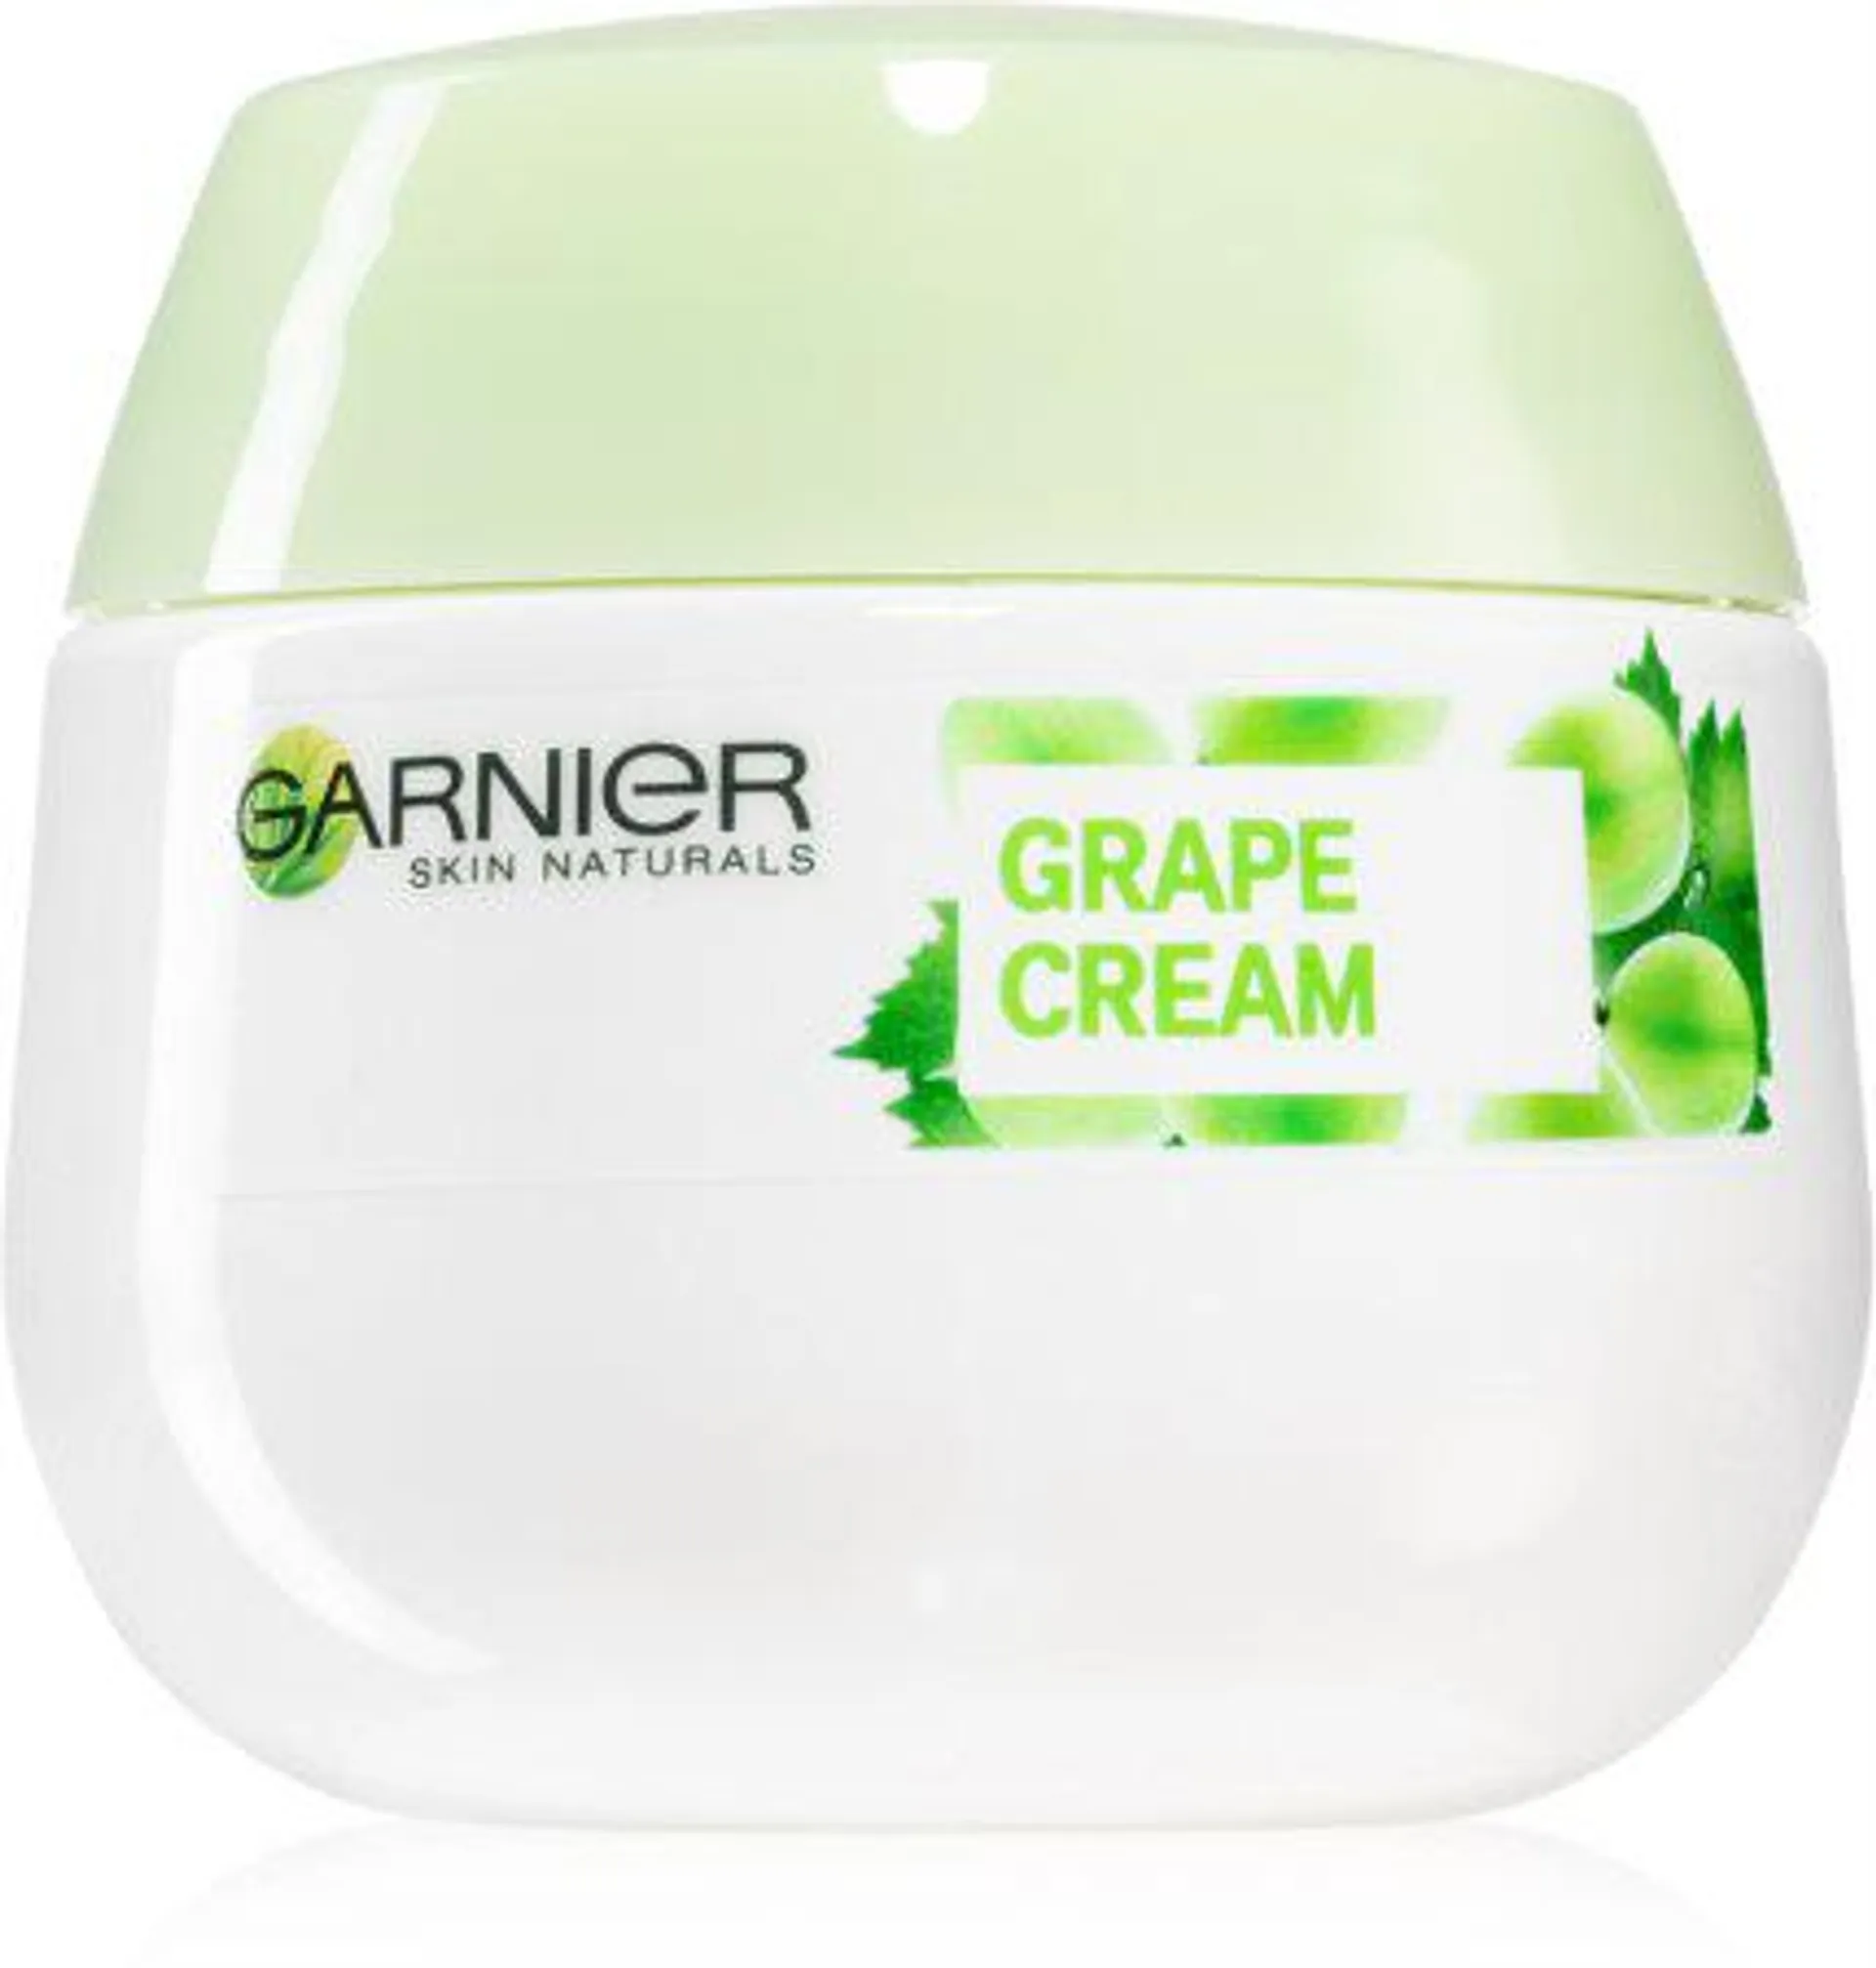 Moisturising Cream for normal and combination skin